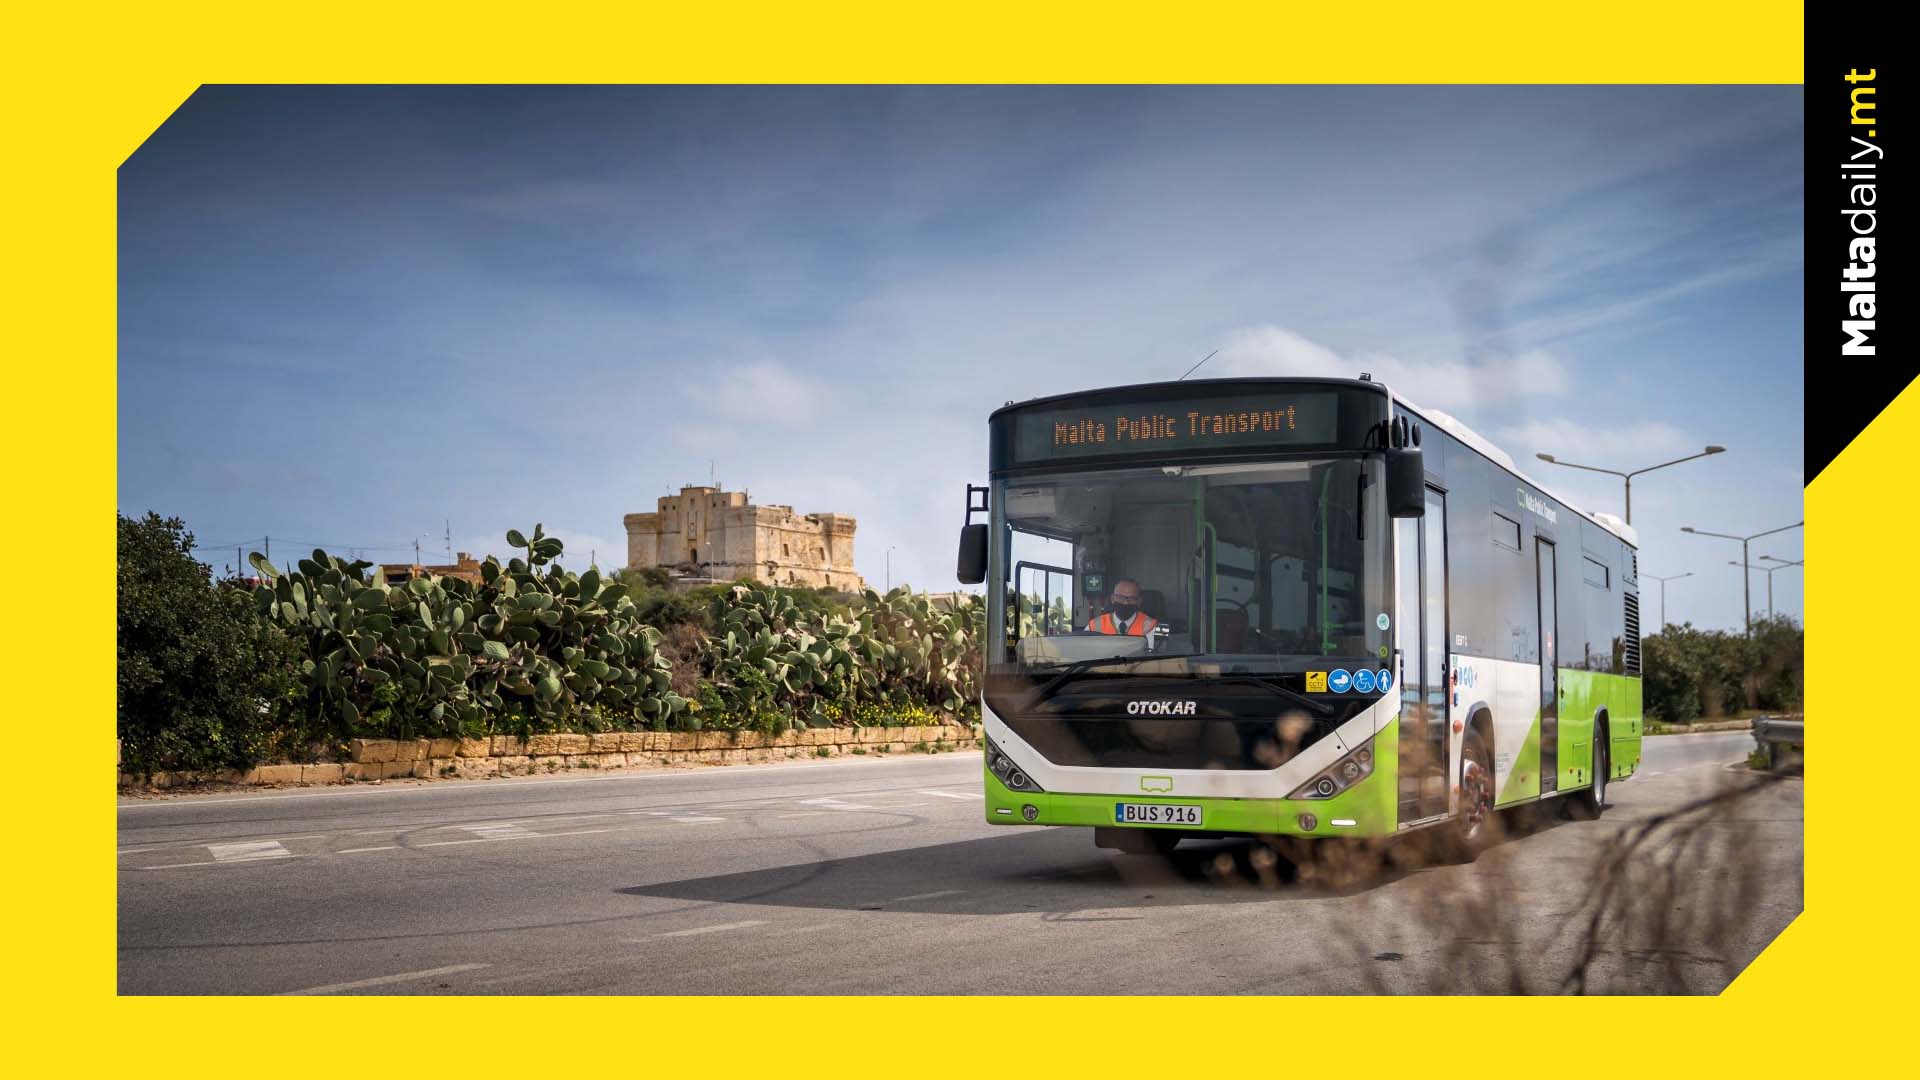 Malta Public Transport Introduces New TD30 And TD31 Routes In Gozo